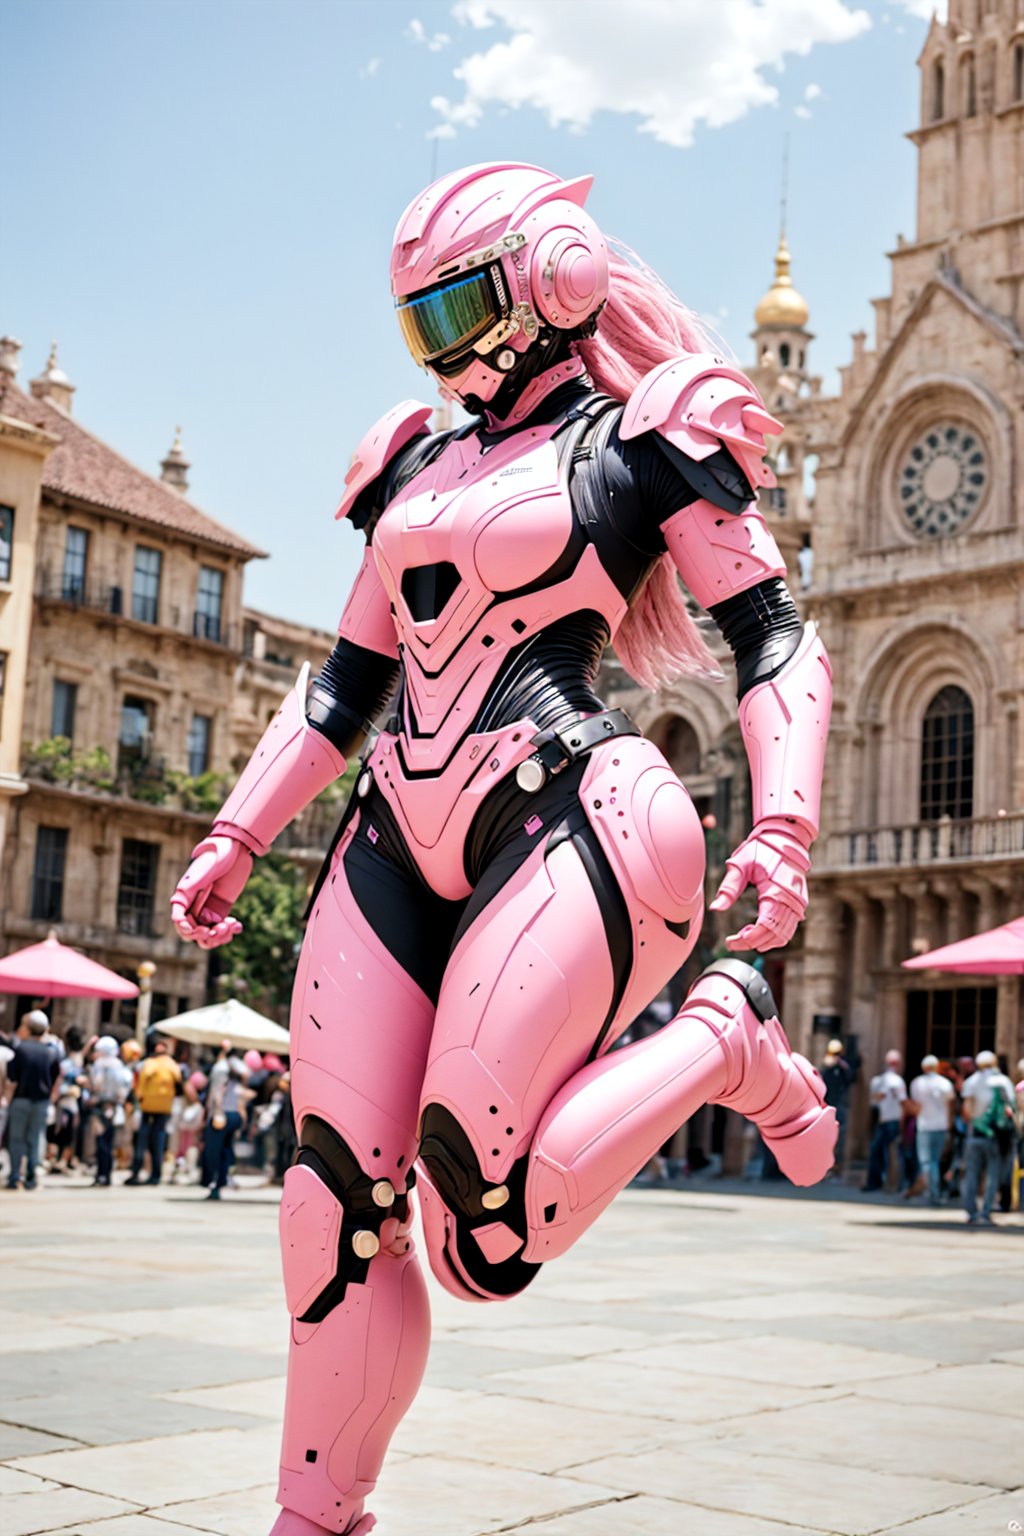 Wide angle 8k cinematic photo, full body view, (Pink zzmckzz:1.2), Protective helmet, Crowded Historic Architecture backdrop, Energetic Jumping Jacks, Vivid bokeh details, captured with a 35mm film camera <lora:zzmckzz v4:1>